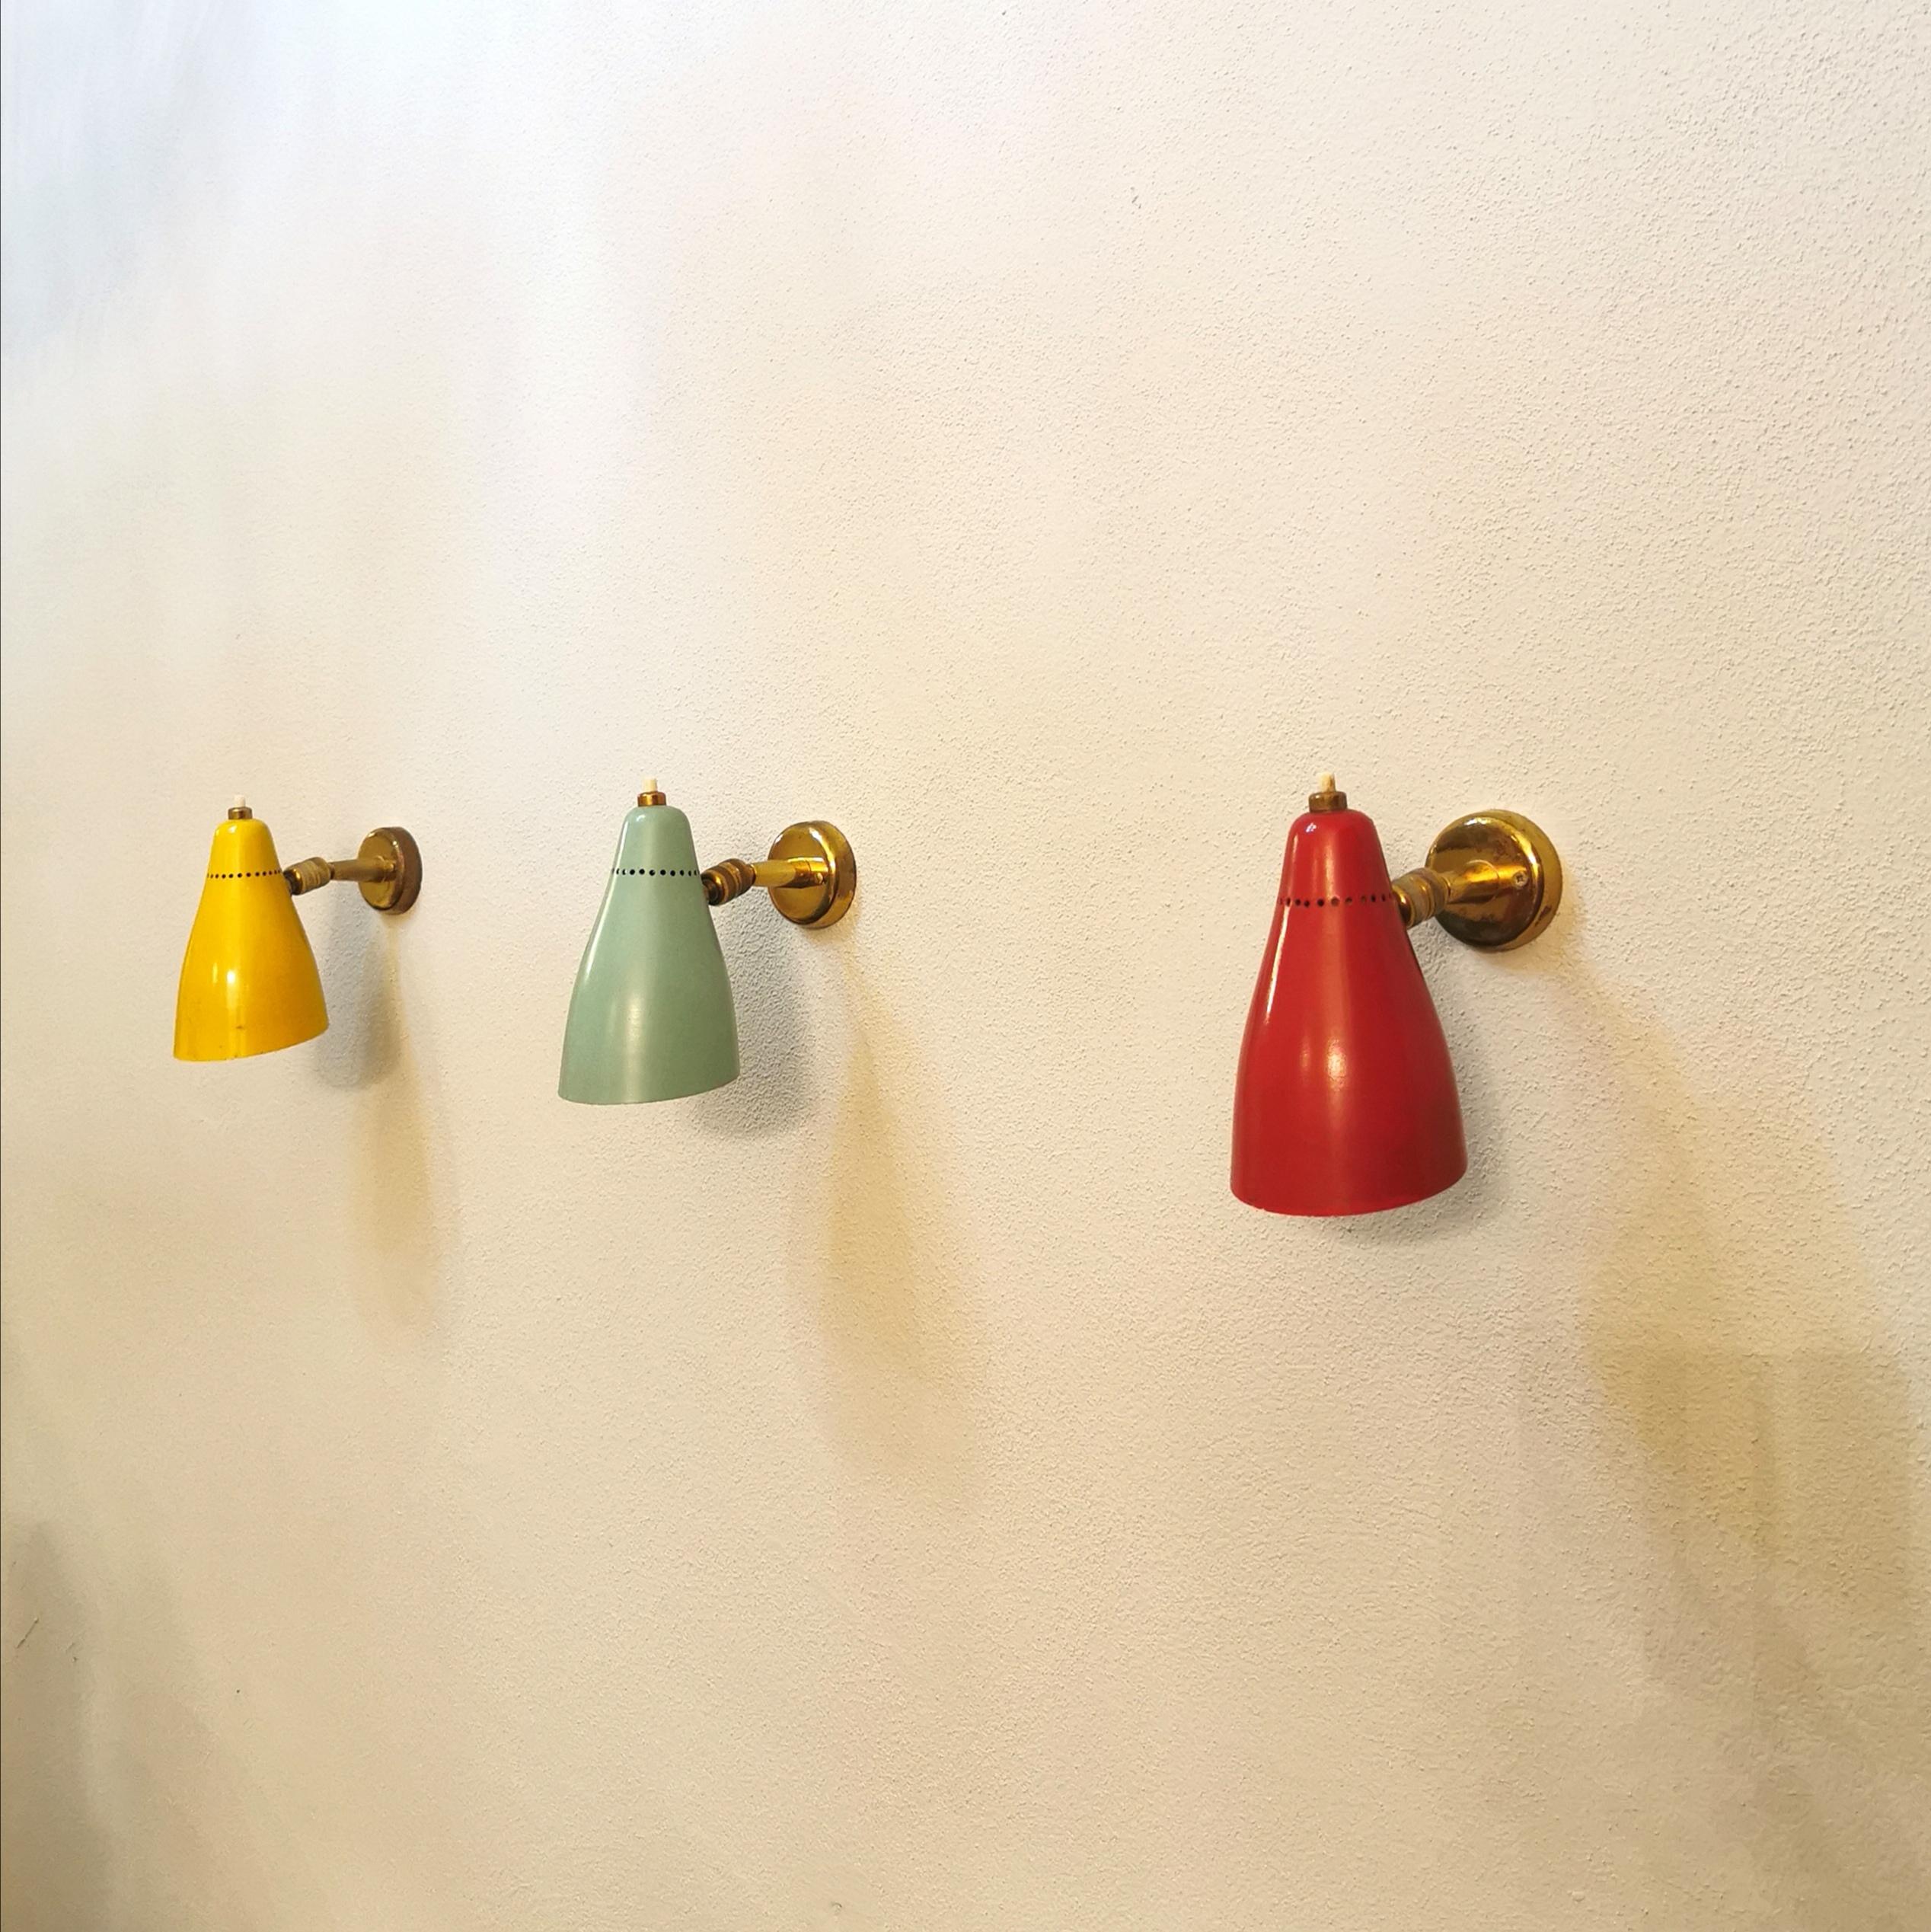 Set of 3 wall lamps designed by the Italian designer Giuseppe Ostuni in the 1950s. The lamps have a brass wall-mounted housing with yellow, green and red diffusers in conical enamelled aluminum, which can be directed thanks to the brass joints.